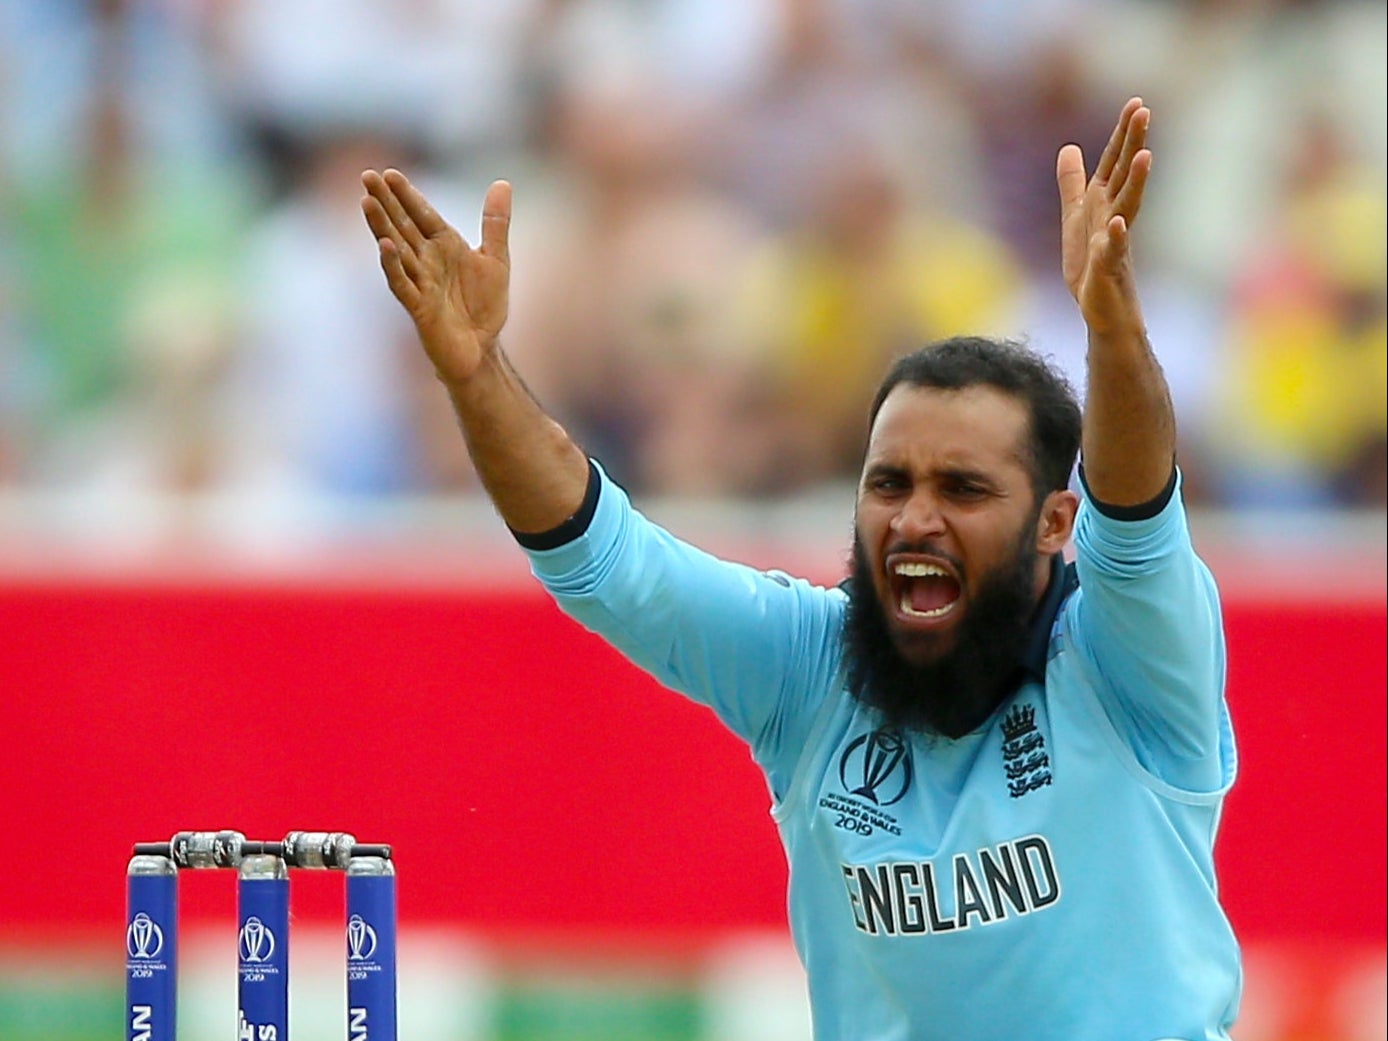 Adil Rashid is pleased that men and women's games will be staged together during The Hundred